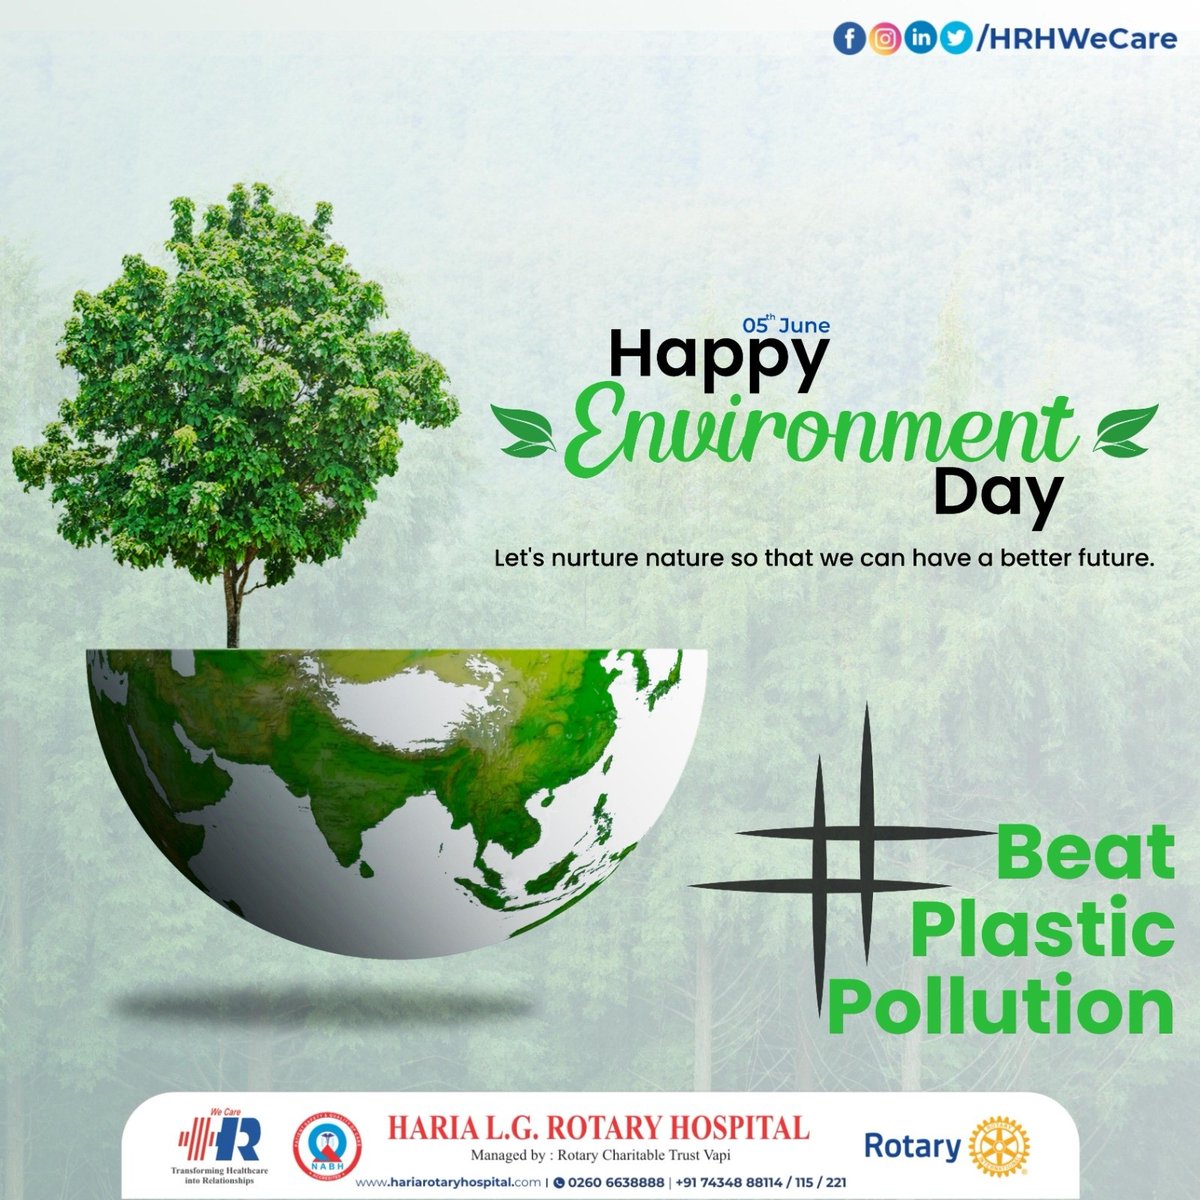 Breathe in the fresh air, show the Earth we care. Celebrating World Environment Day, a reminder to repair and share.

#worldenvironmentday #DoctorAppointment #healthcare #HRHWeCare #RotaryVapi #HariaLGRotaryHospital #vapi #hospital #multispecialityhospital #health #treatment